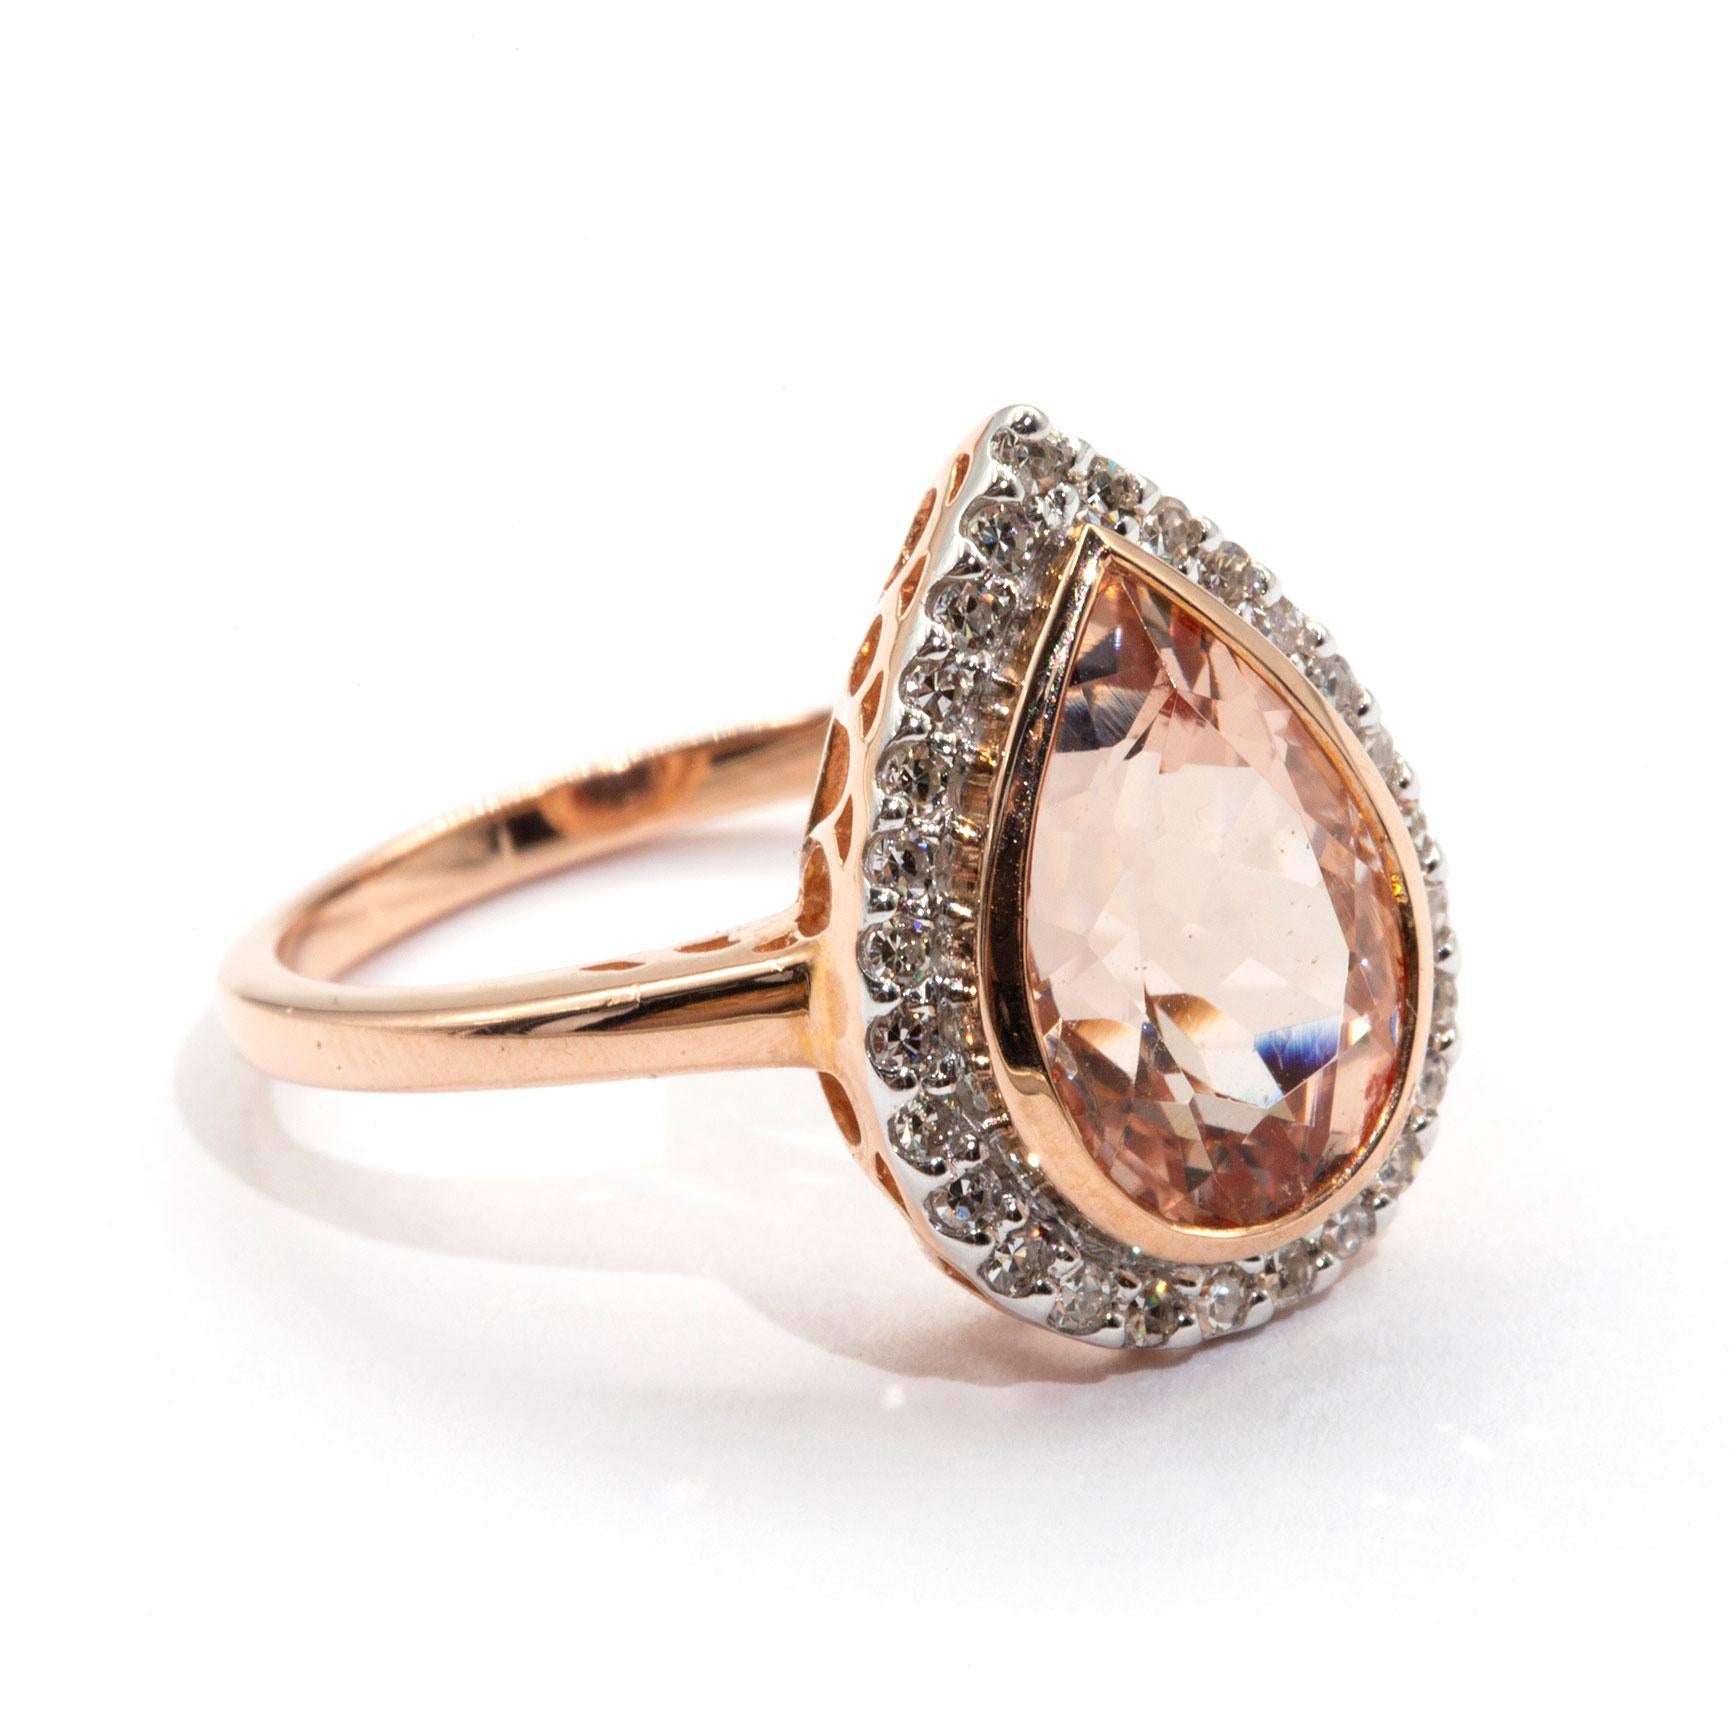 Made in 9 carat rose gold this wondrous vintage inspired ring boasts a romantic pear cut 2.82 carat bright light pink Morganite encompassed by a gorgeous halo border of carefully claw set round diamonds. We have named this alluring ring The Bella